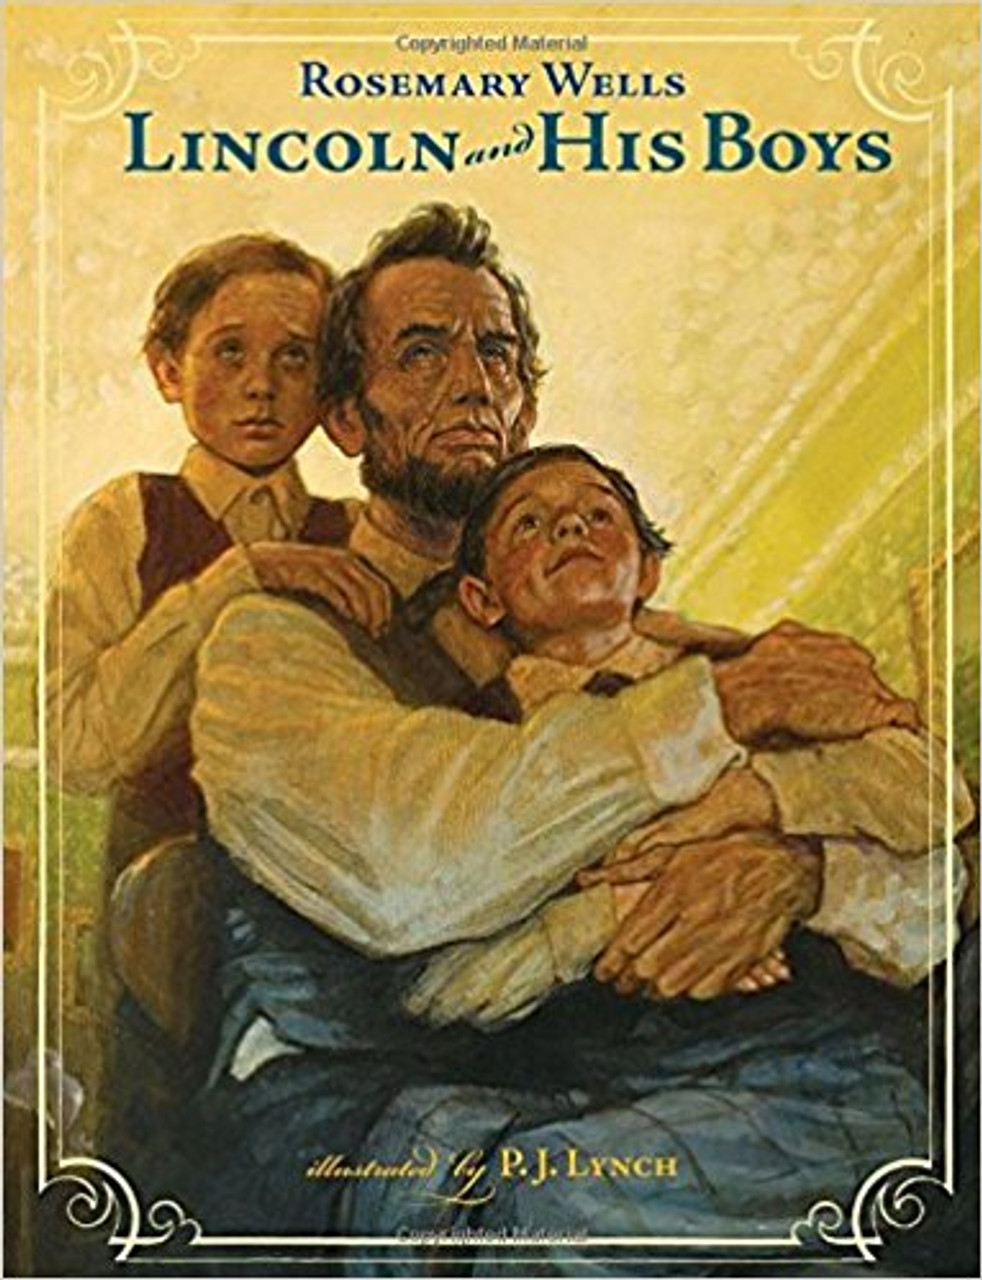 Lincoln and His Boys (Paperback) by Rosemary Wells